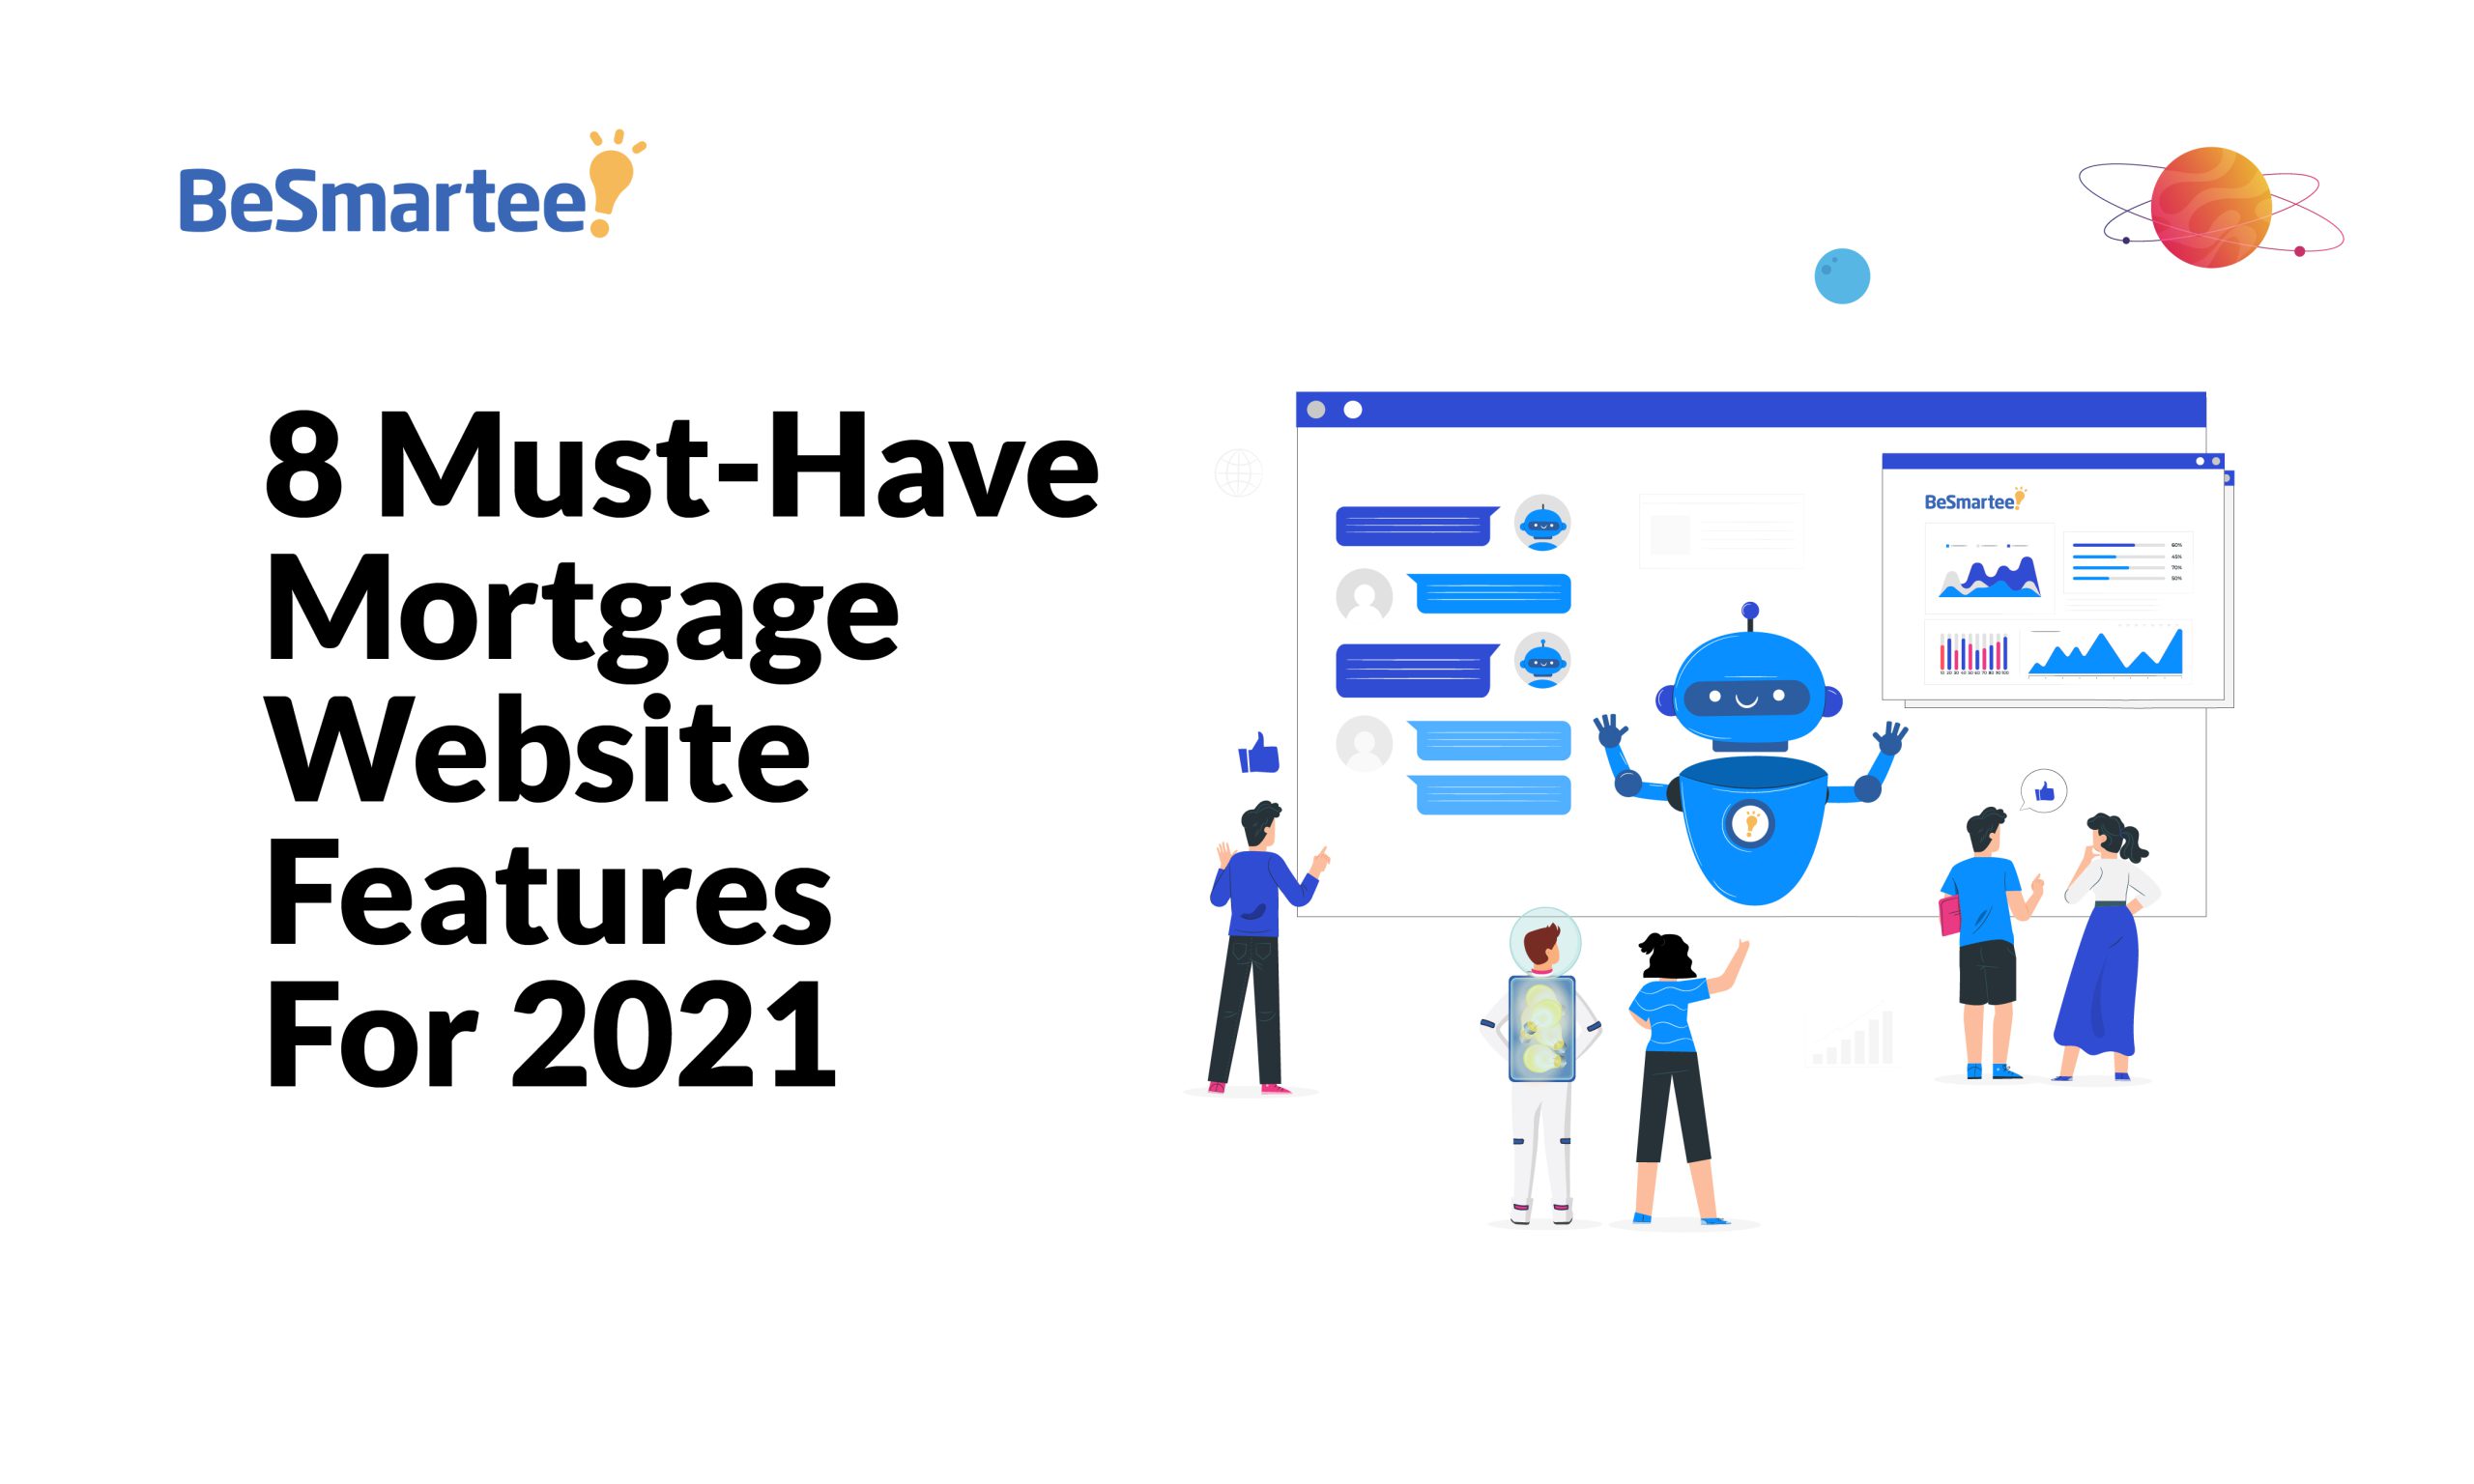 8 Must-Have Mortgage Website Features For 2021